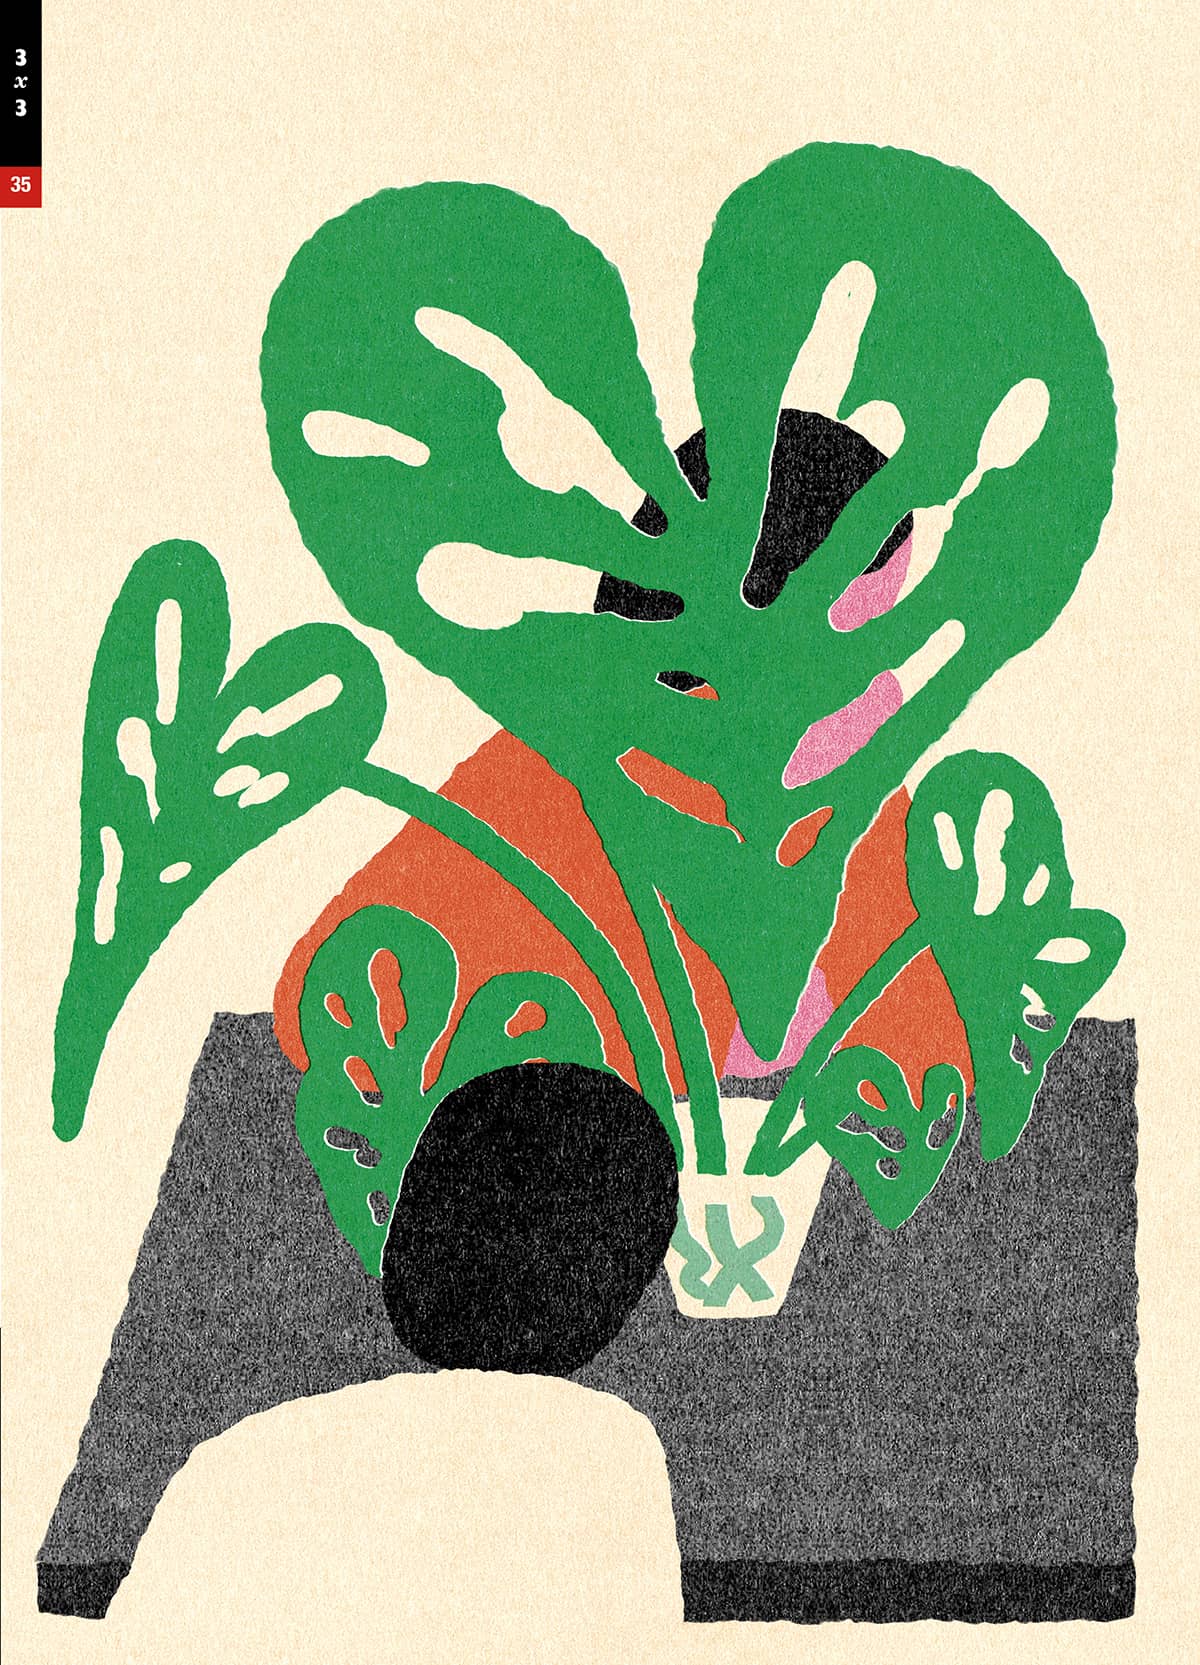 3x3 Issue Graphic illustration of two people at a table with a large overgrown plant between them; Cover image by Oyow